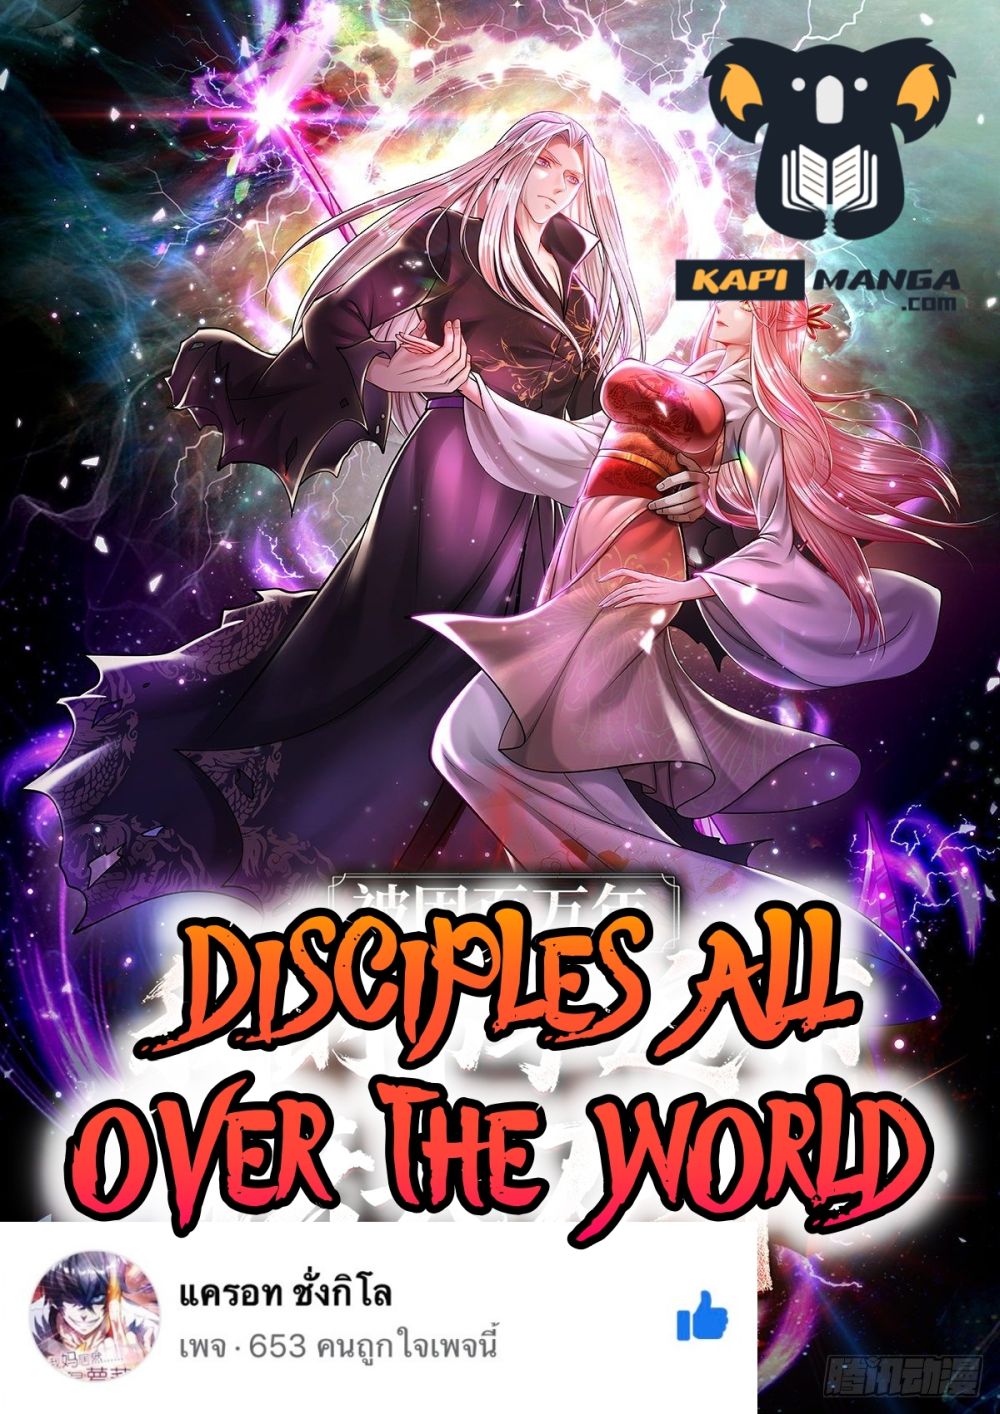 Disciples All Over the World à¸à¸­à¸à¸à¸µà¹ 44 (1)